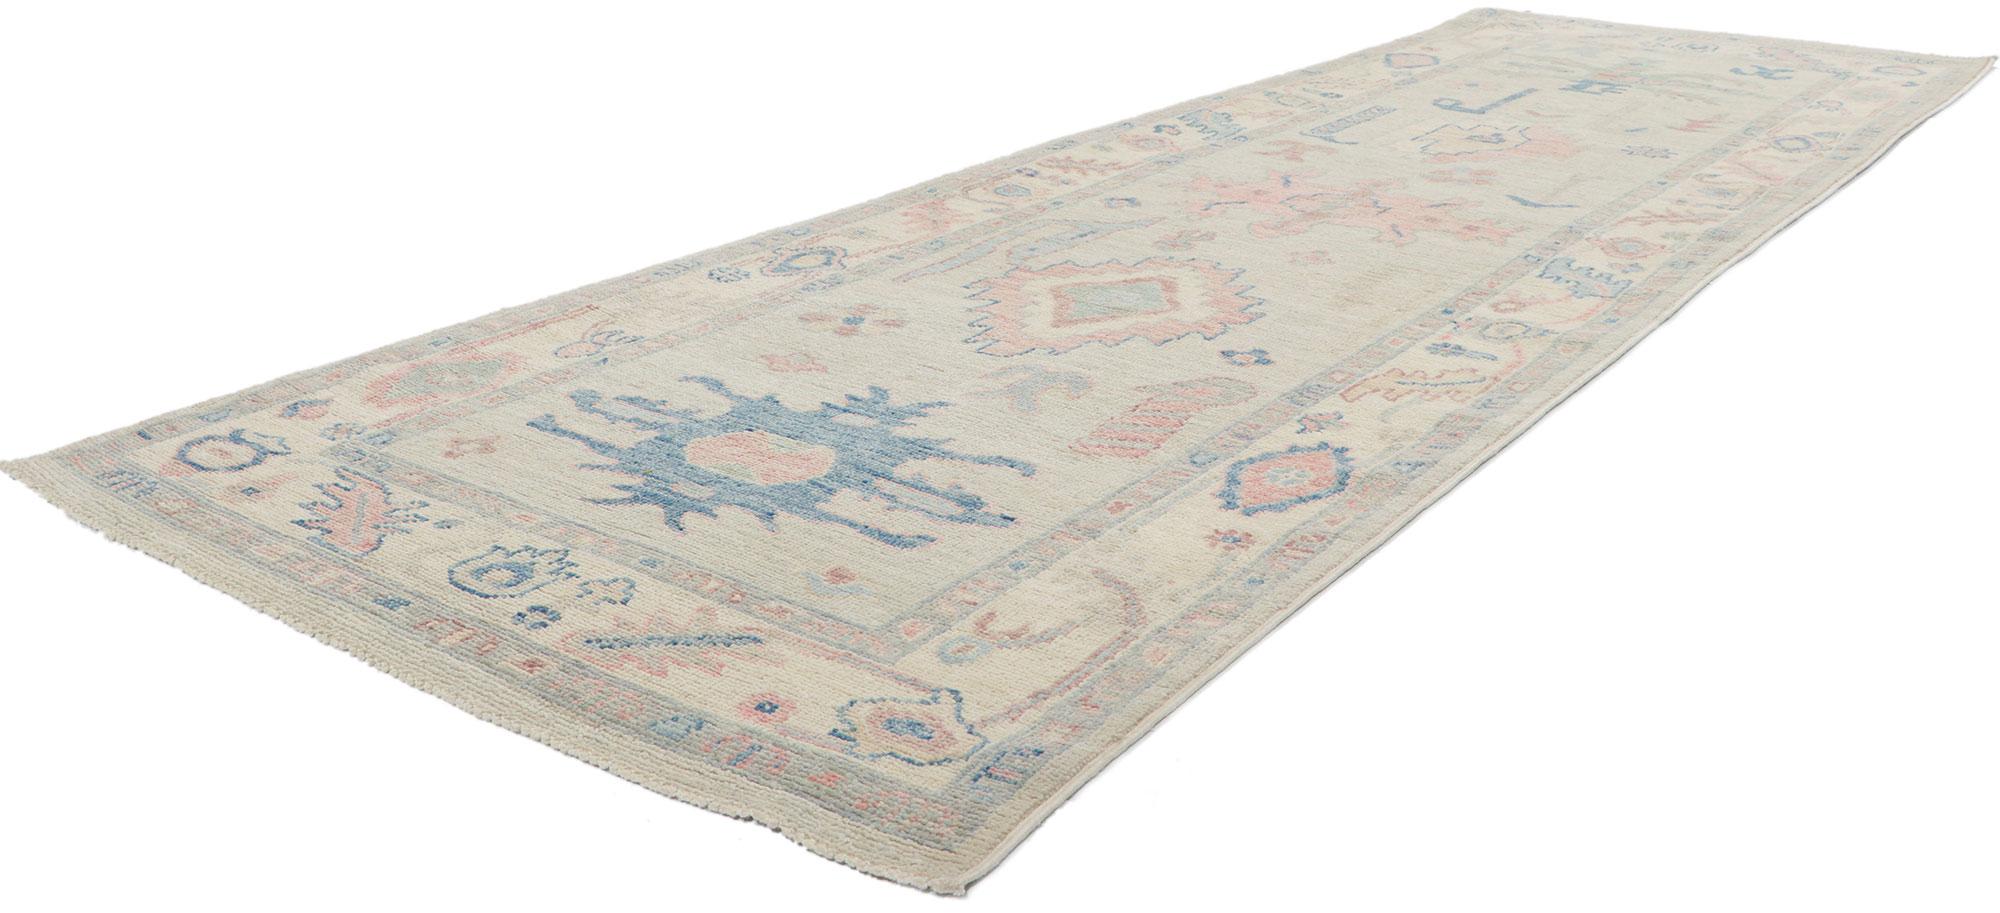 80861 ?New Contemporary Oushak Runner, 03'00 x 09'10. This hand-knotted wool contemporary Oushak hallway rug features an all-over botanical pattern composed of amorphous organic motifs spread across an abrashed oatmeal colored field. It is enclosed